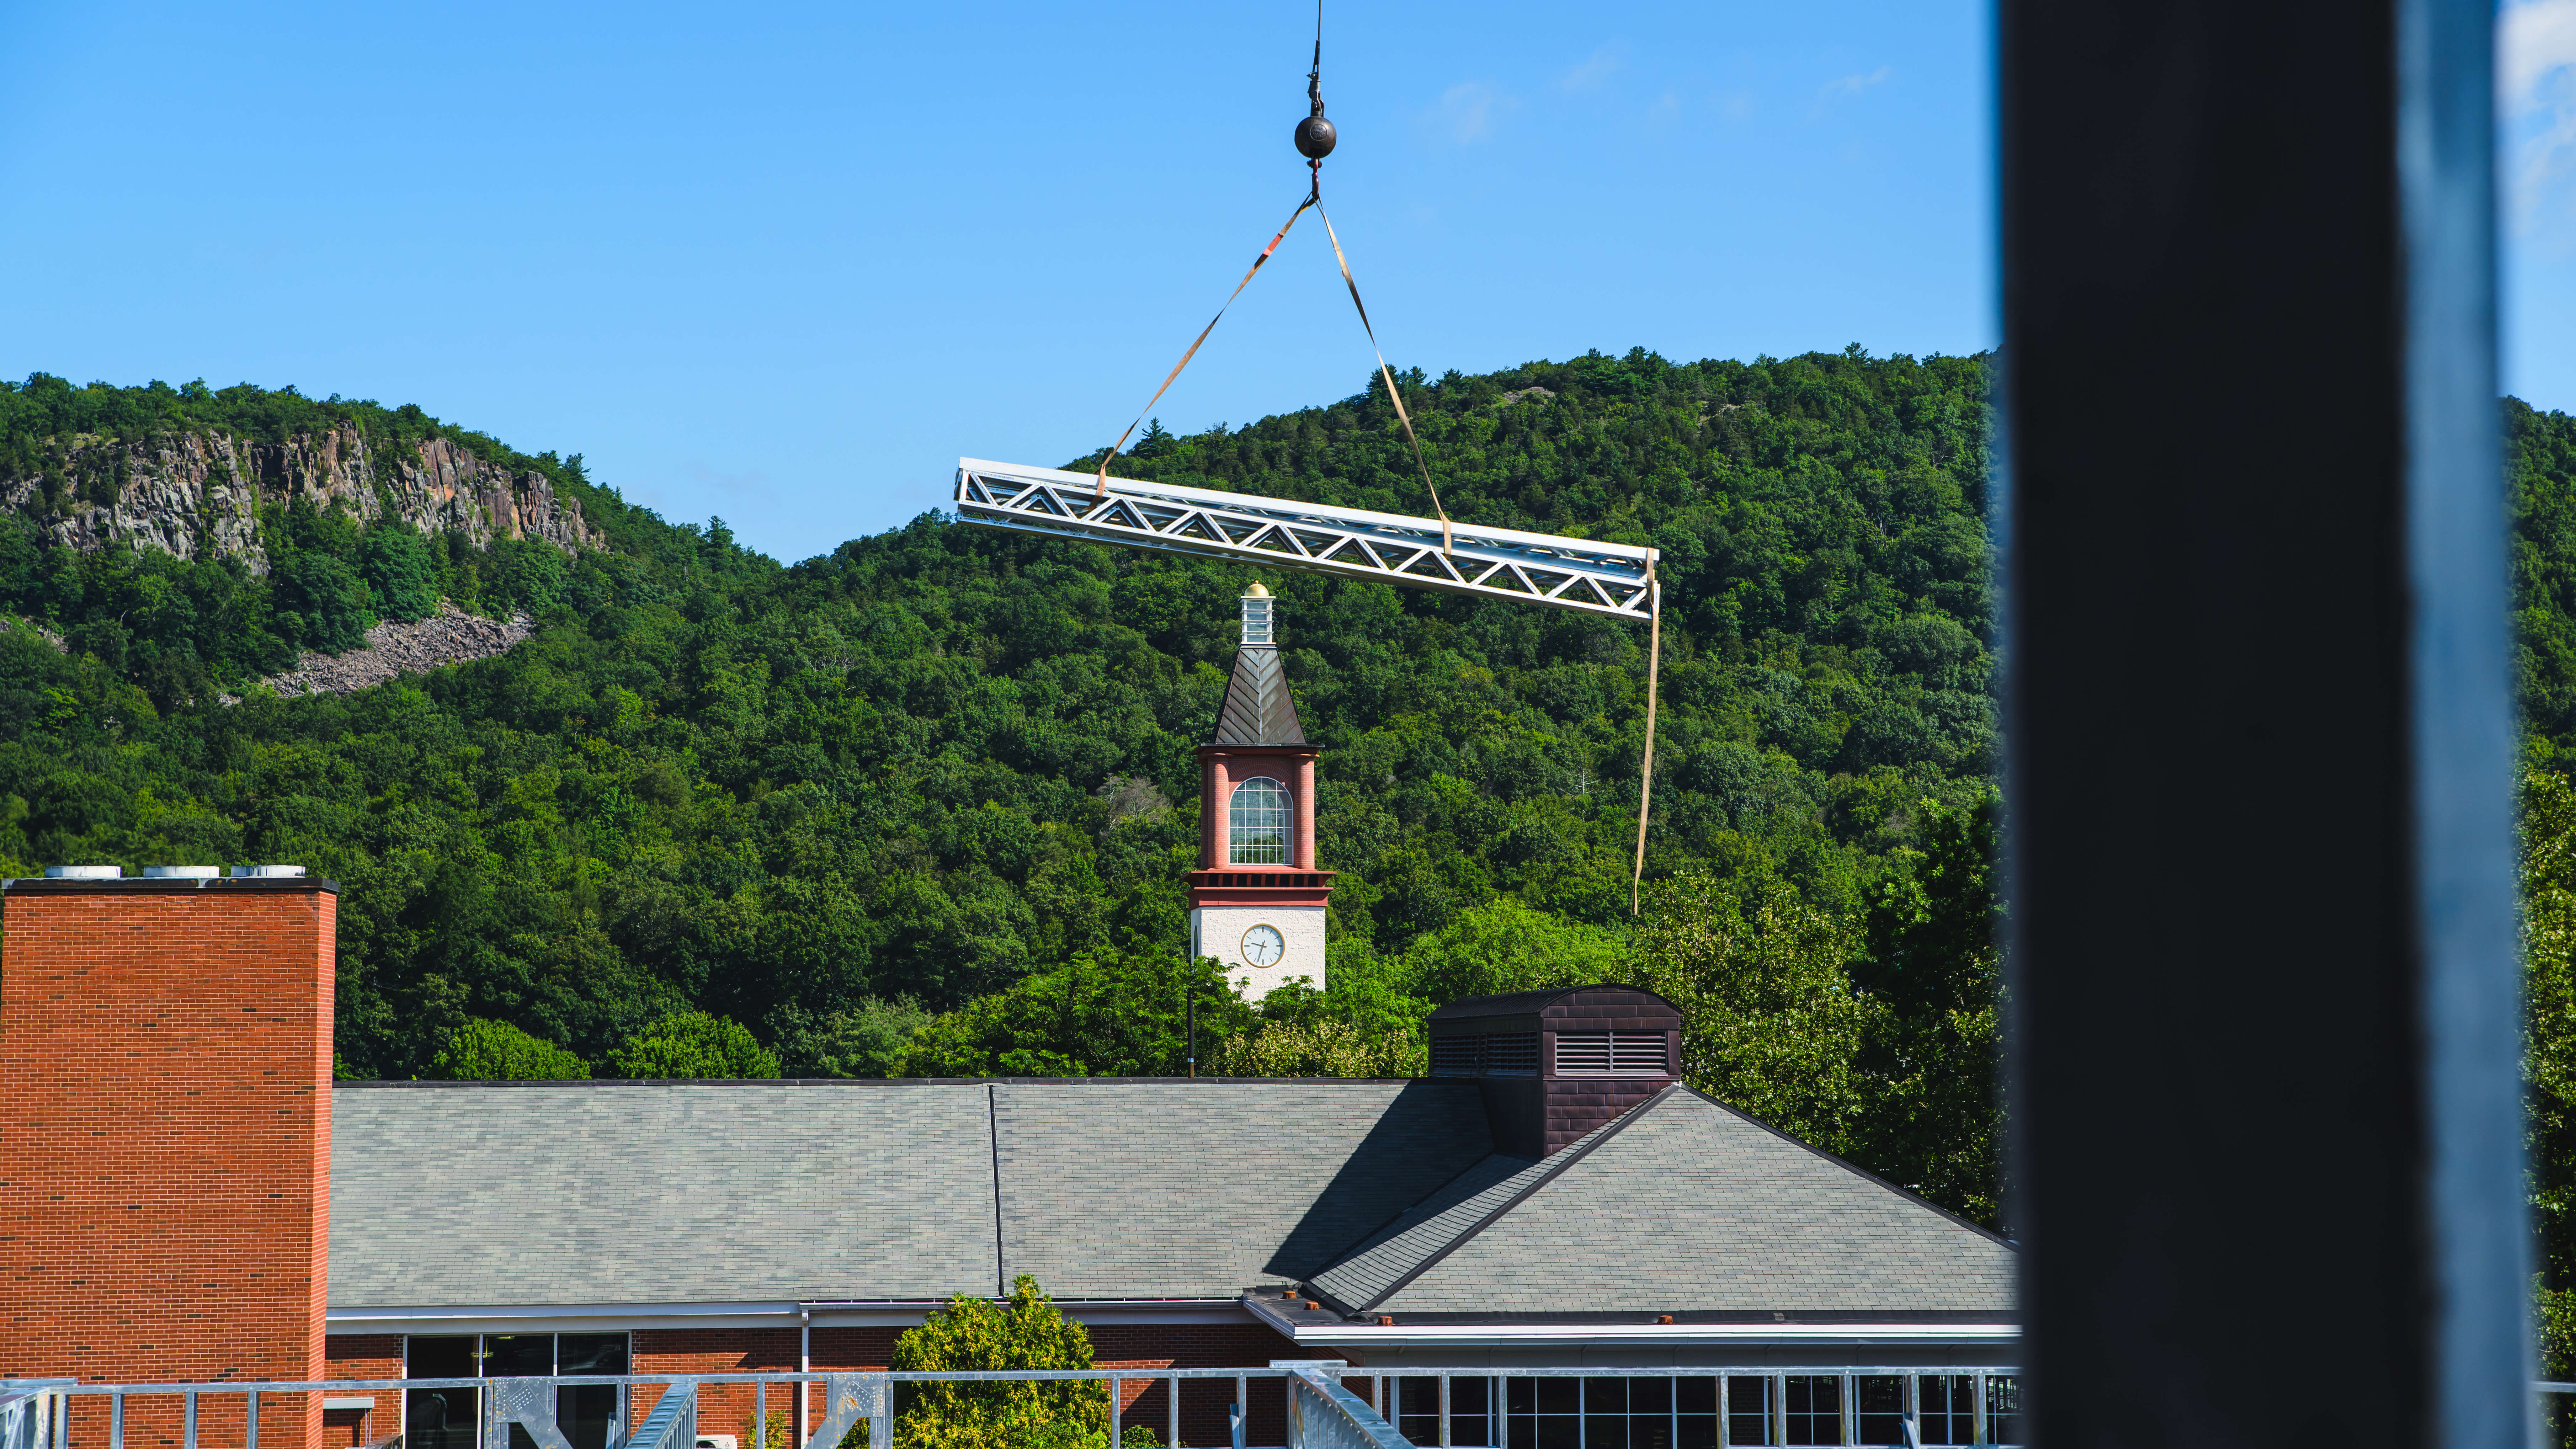 A beam gets raised with the clock tower in view